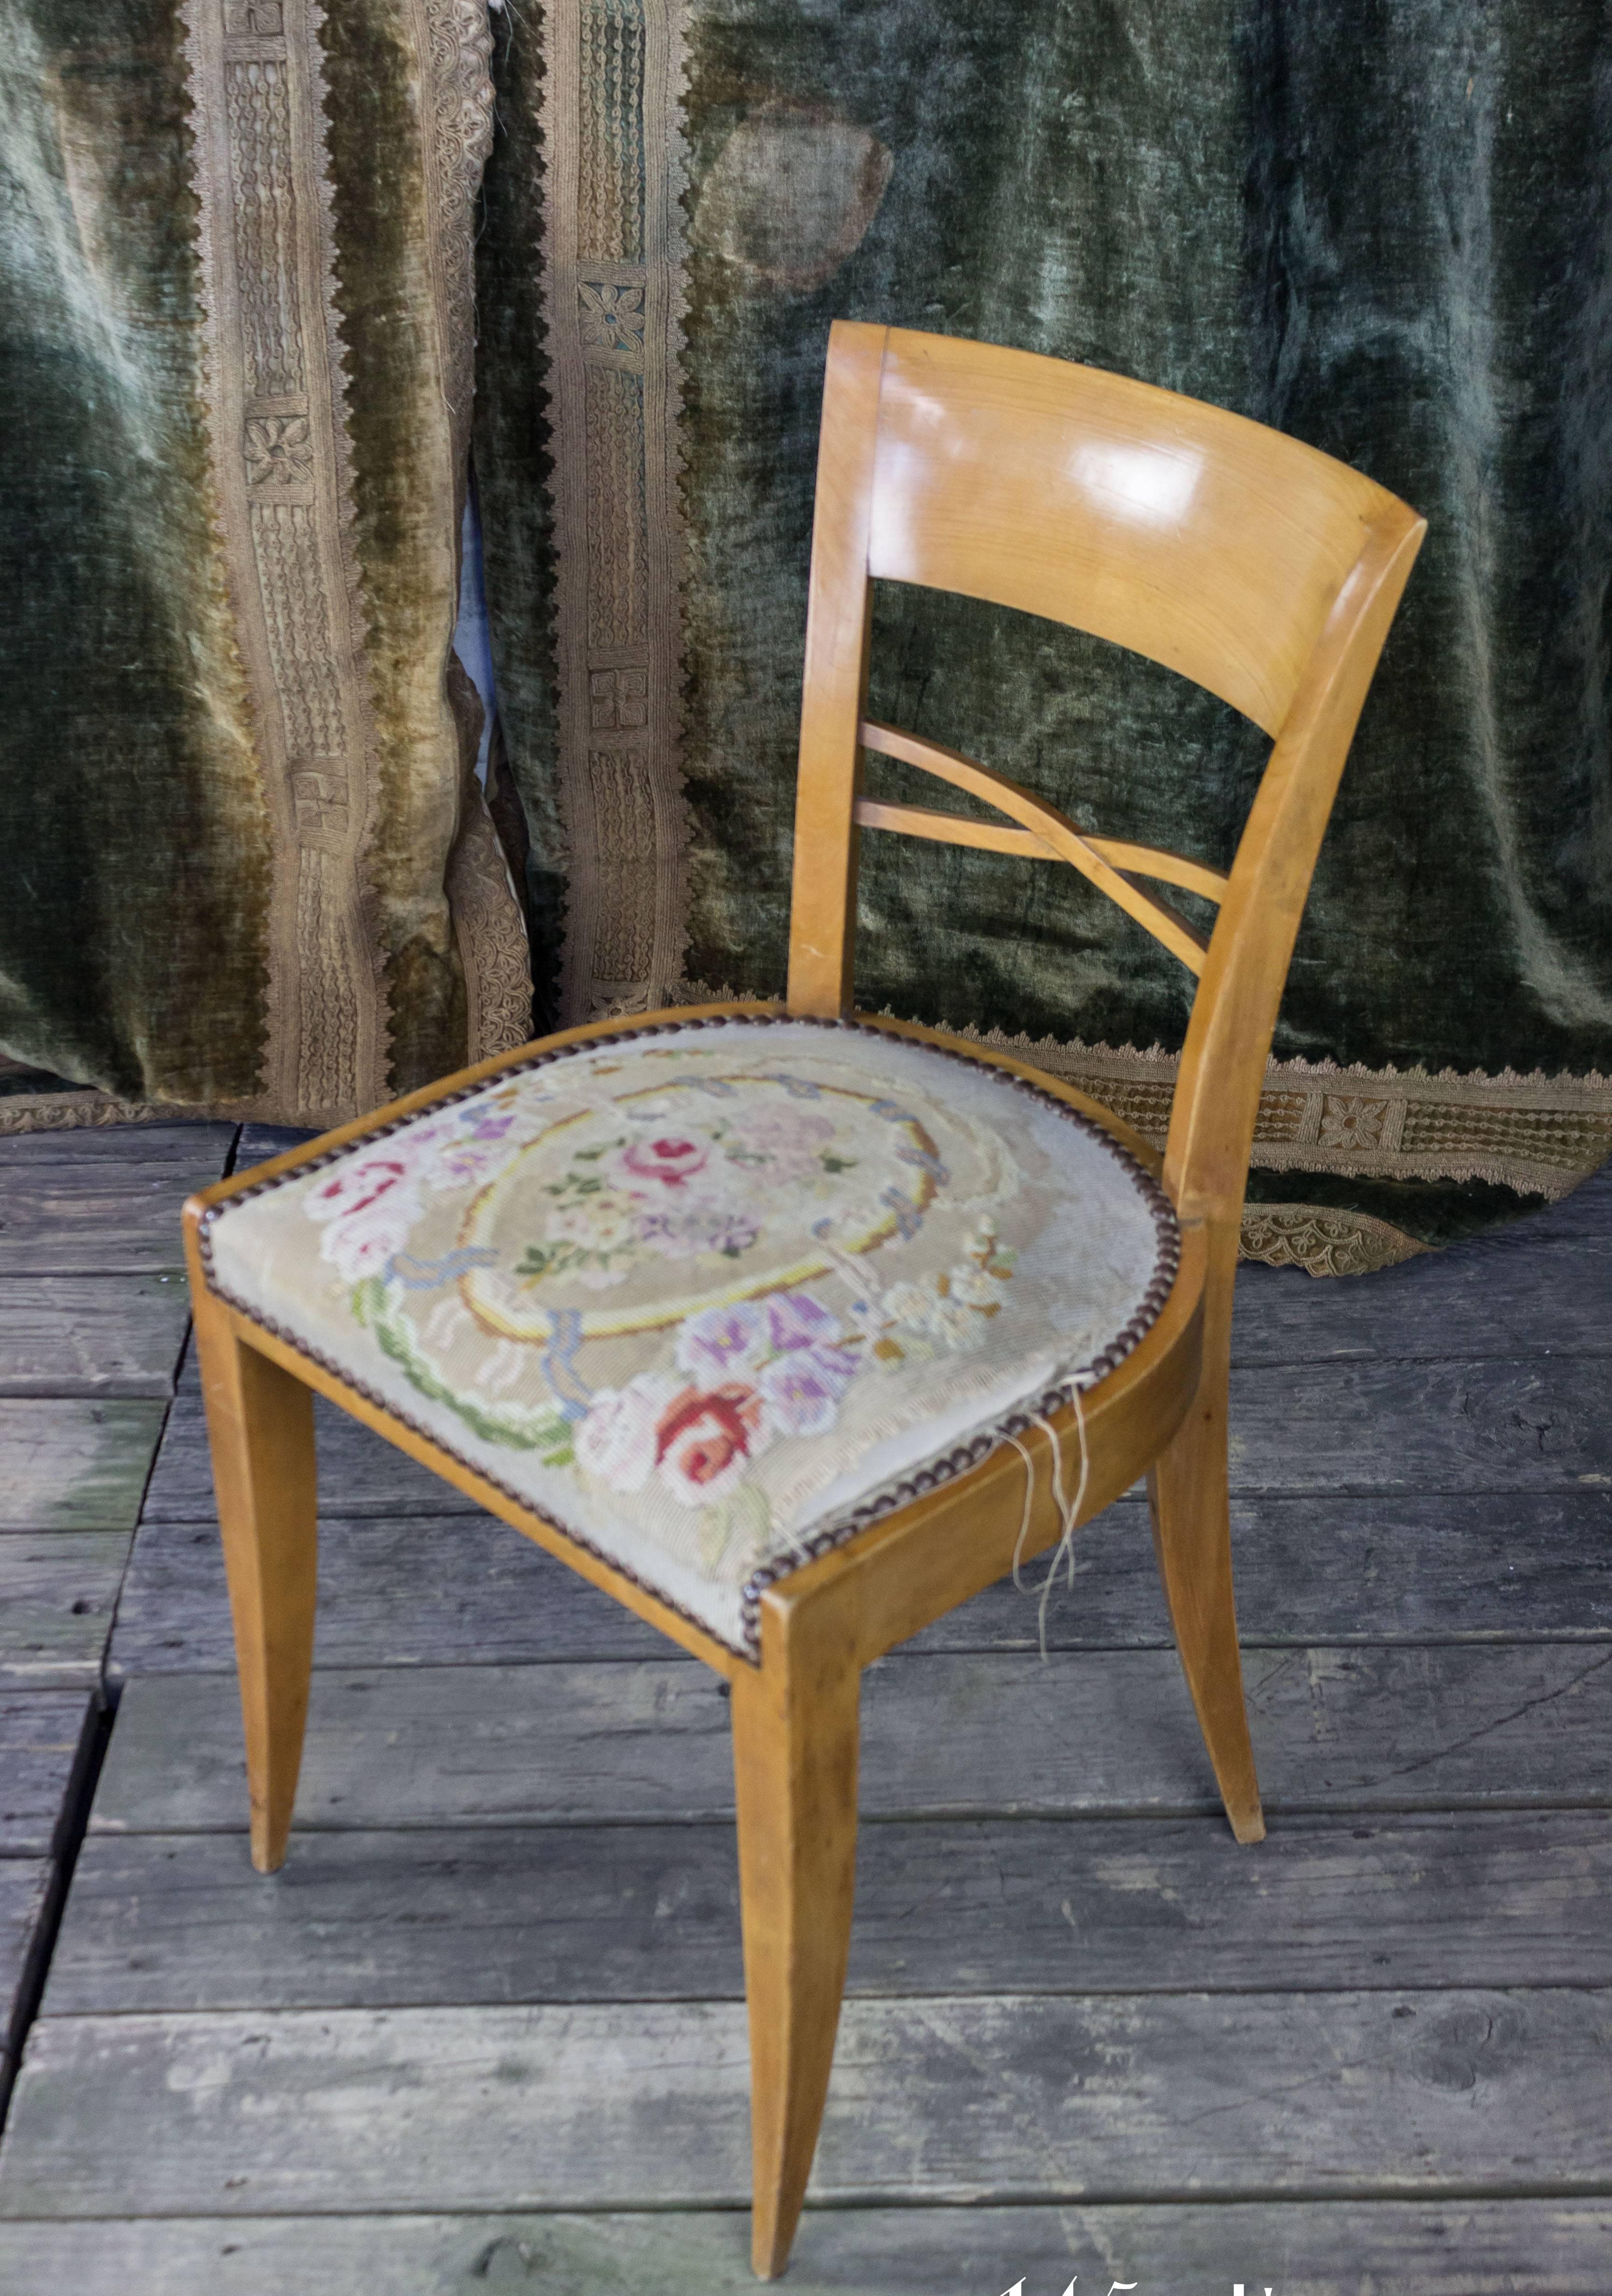 A classic pair of French 1940s side chairs with embroidered seats. This pair of French 1940s side chairs is an exquisite choice for any living space. The beautiful light wood frames and intricately embroidered seats are accented with brass nailhead